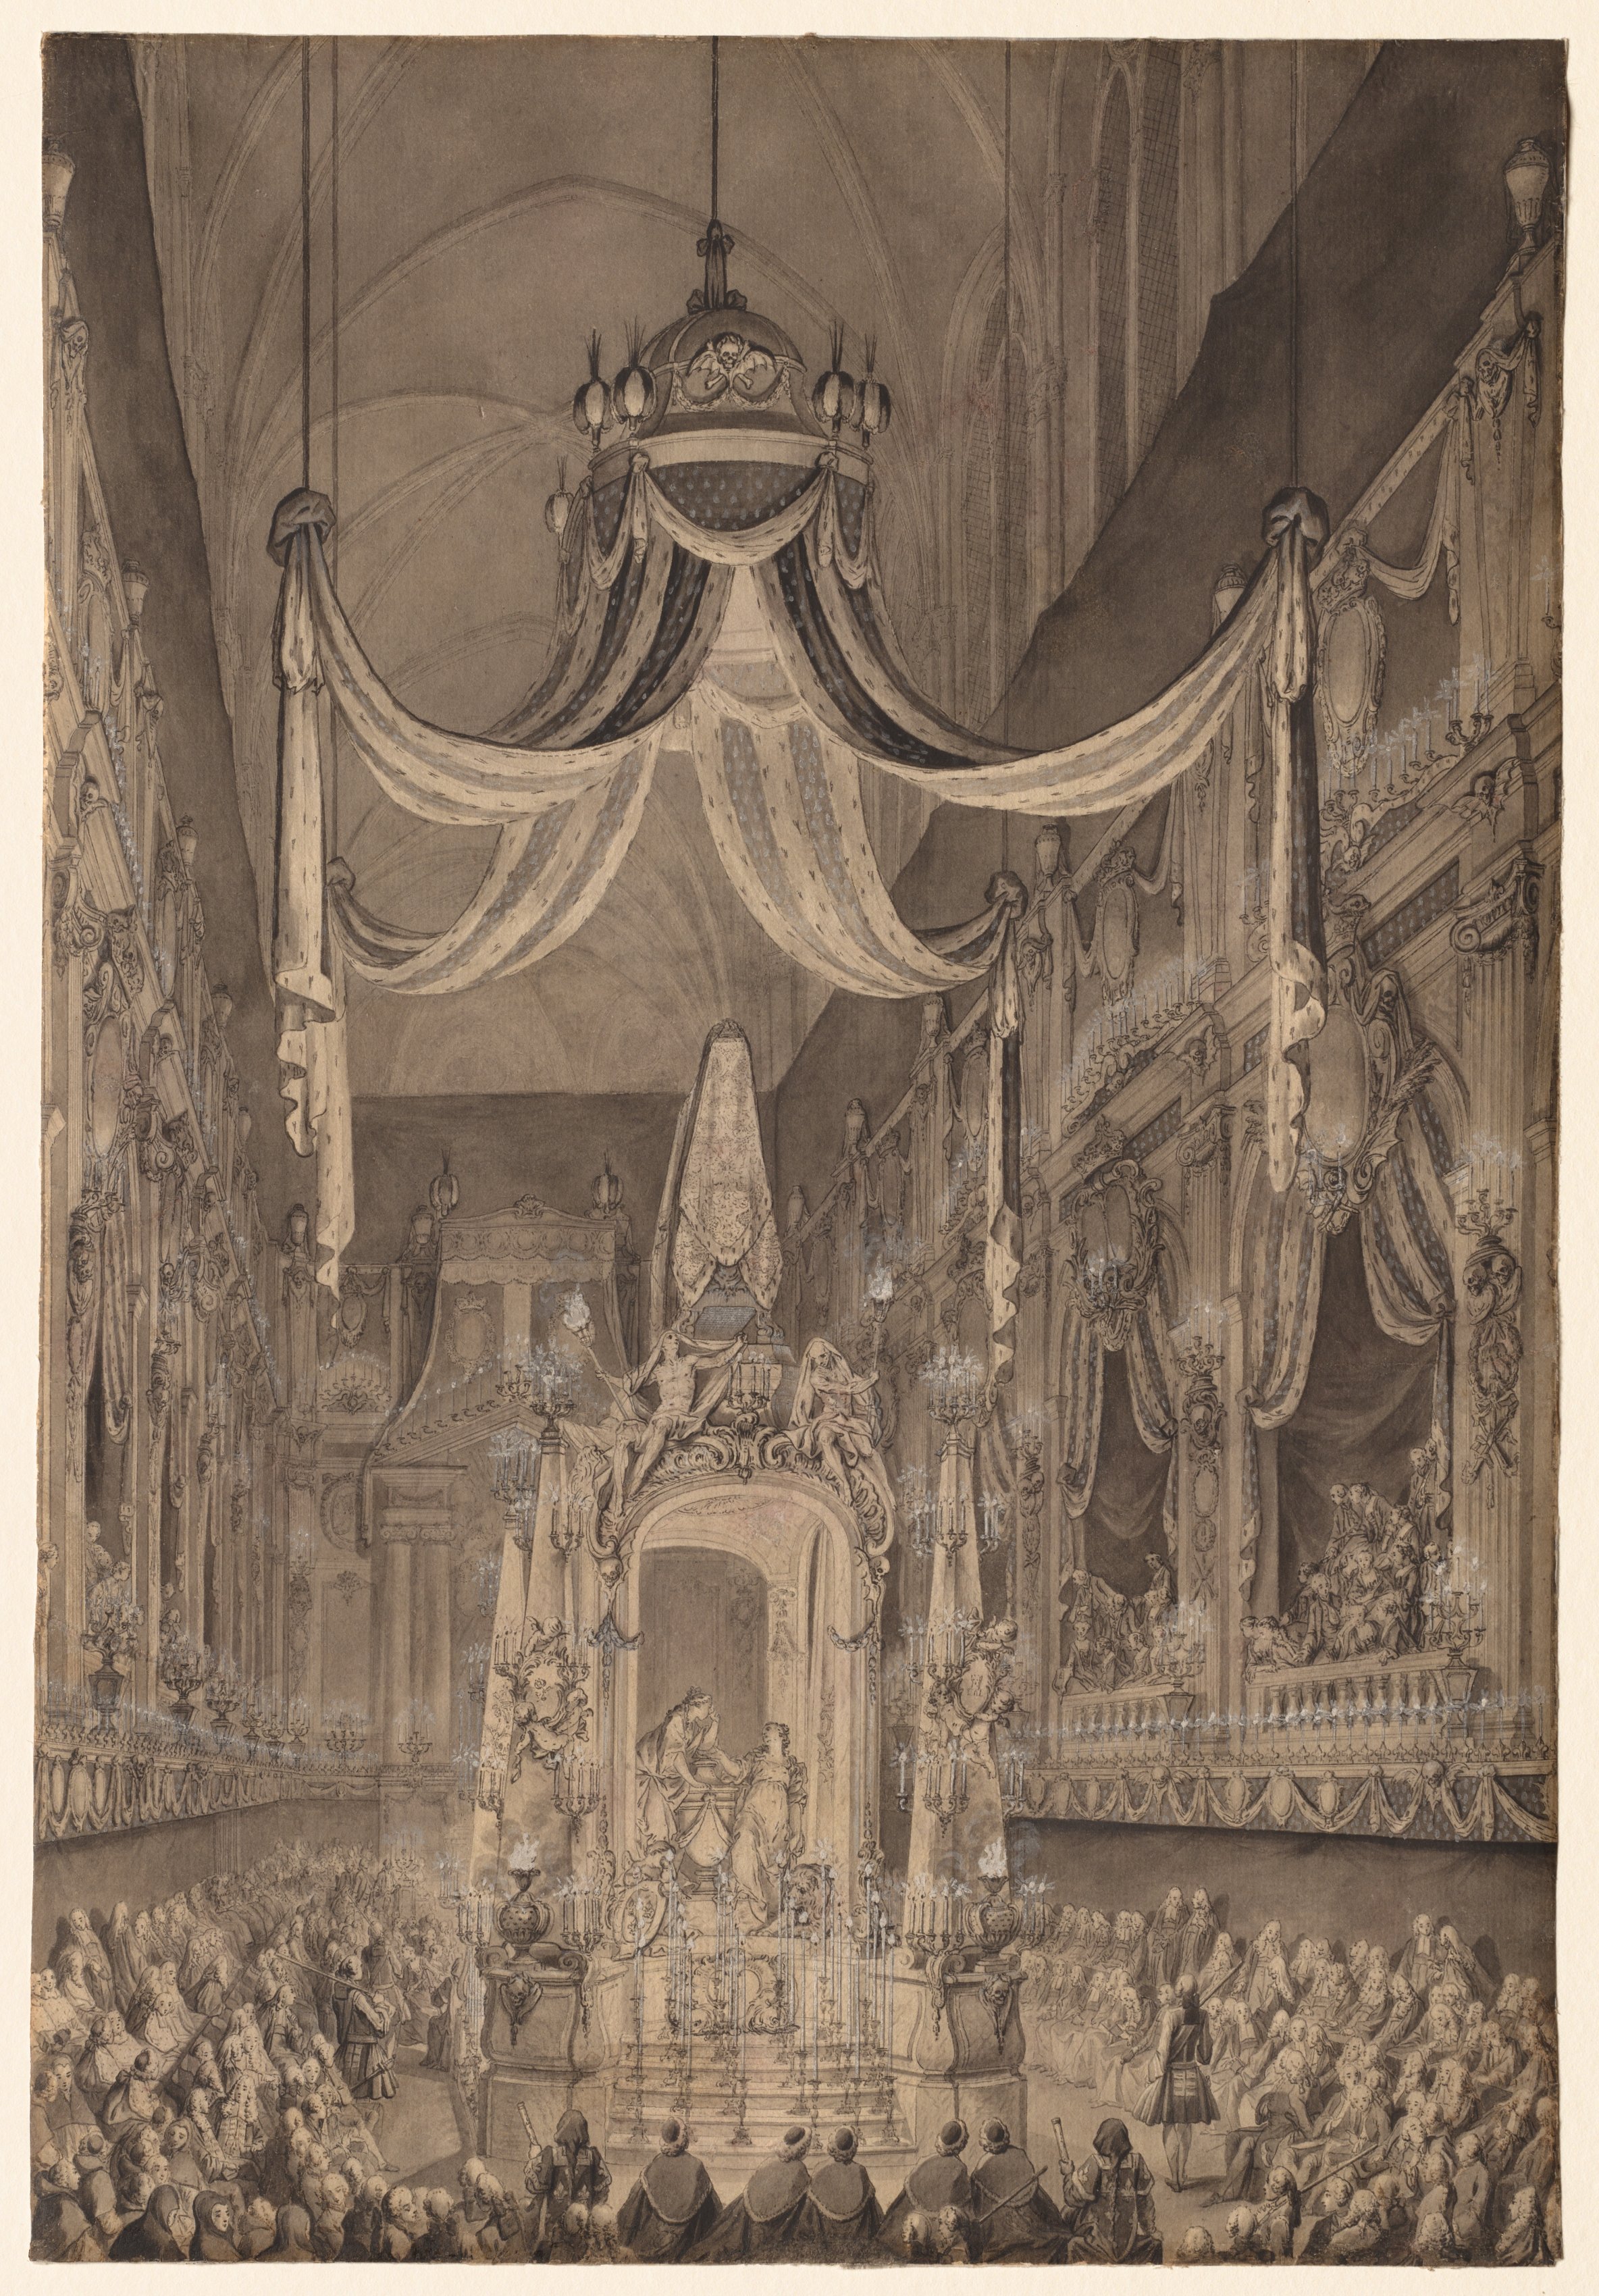 Funeral for Marie-Thérèse of Spain, Dauphine of France, in the Church of Nôtre Dame, Paris, on November 24, 1746